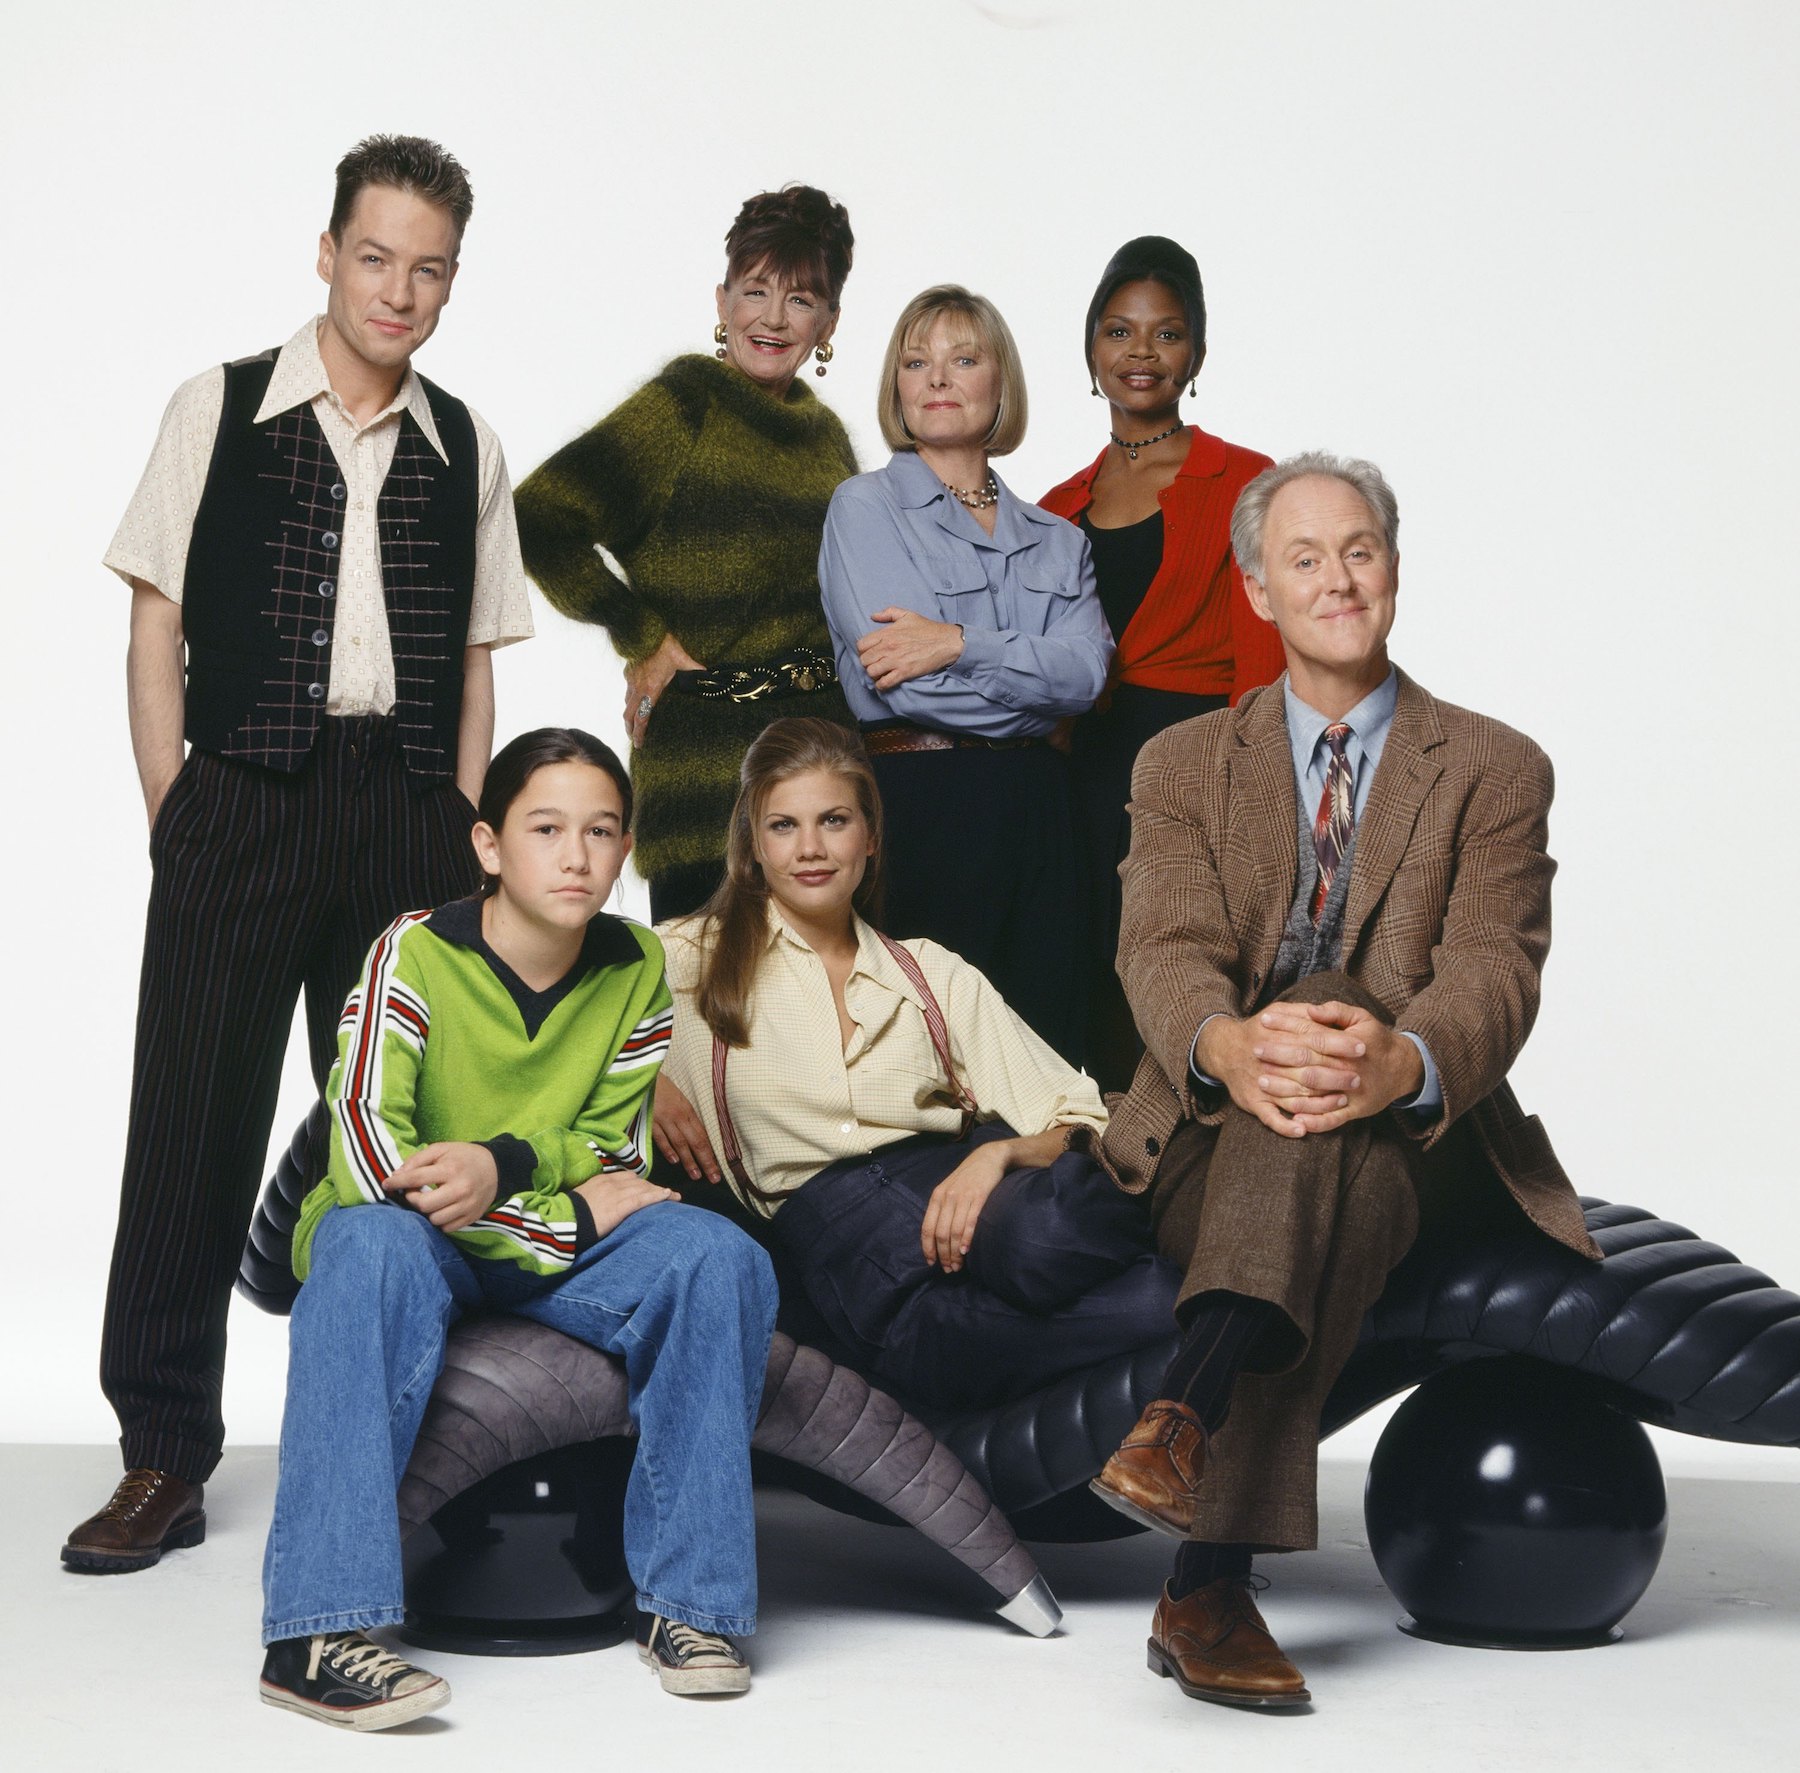 Cast of '3rd Rock from the Sun'